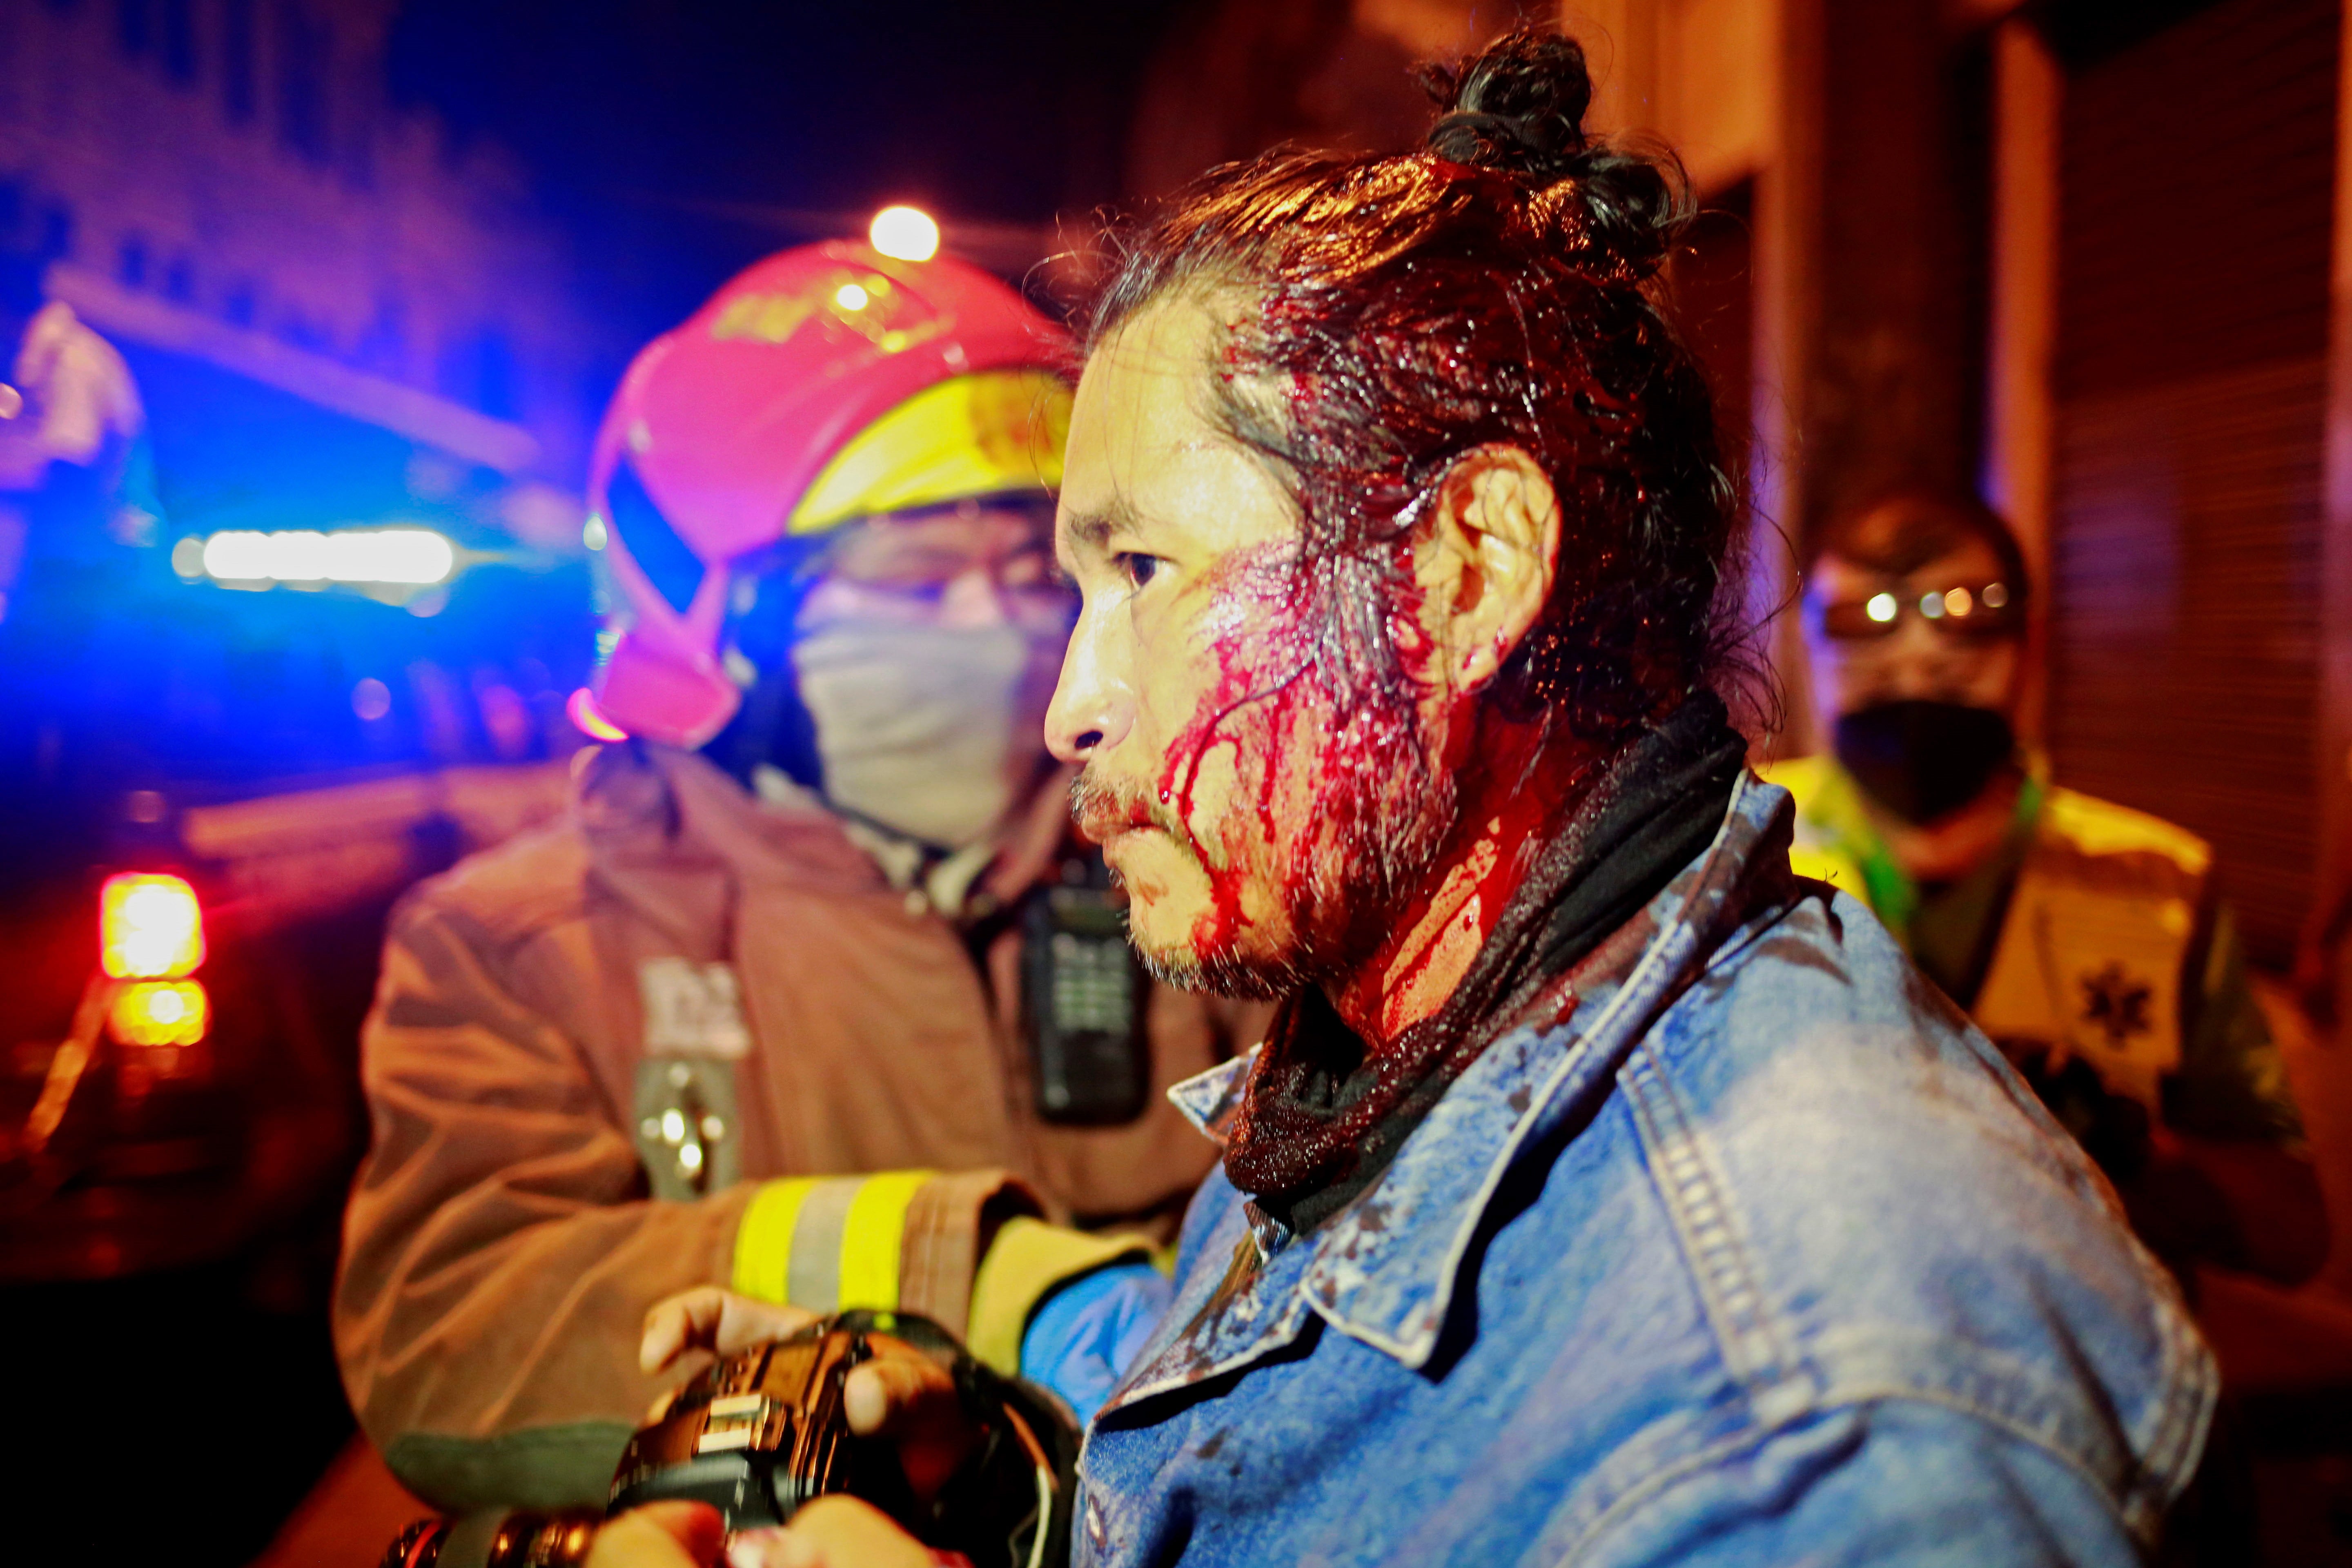 A protestor is given medical treatment after the Congress building in Guatemala City was set alight.